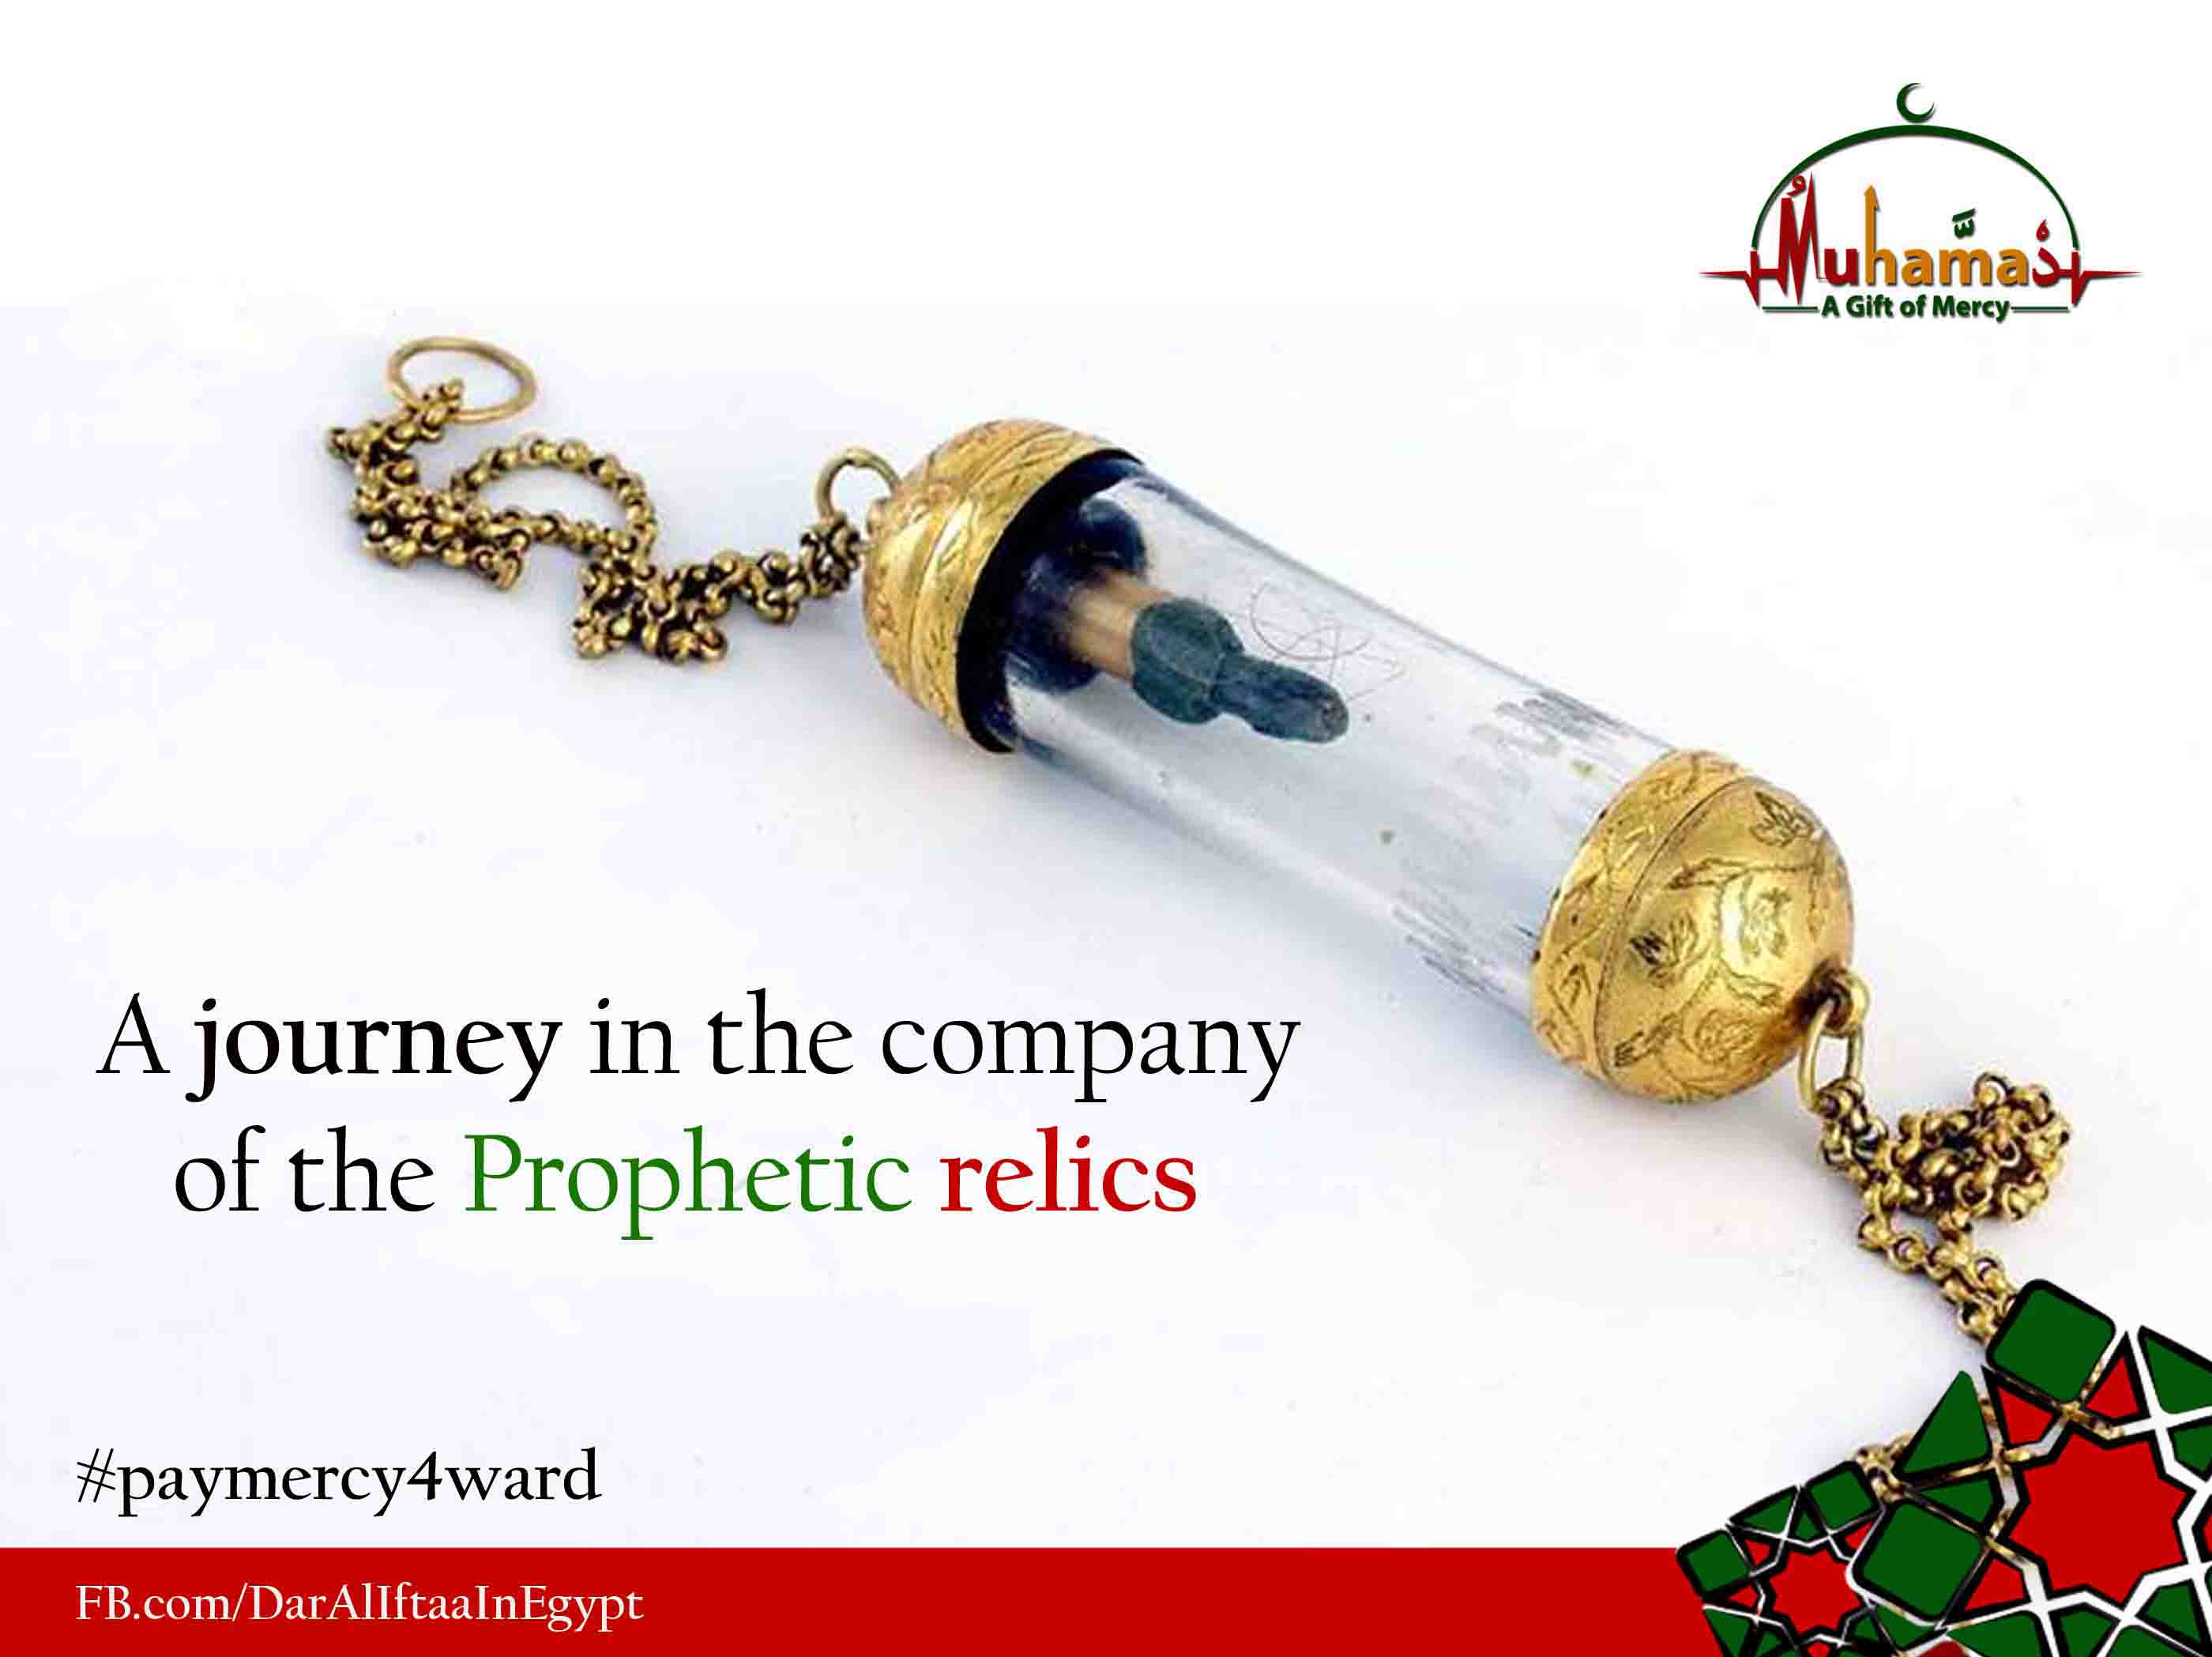 A journey in the company of the Prophetic relics